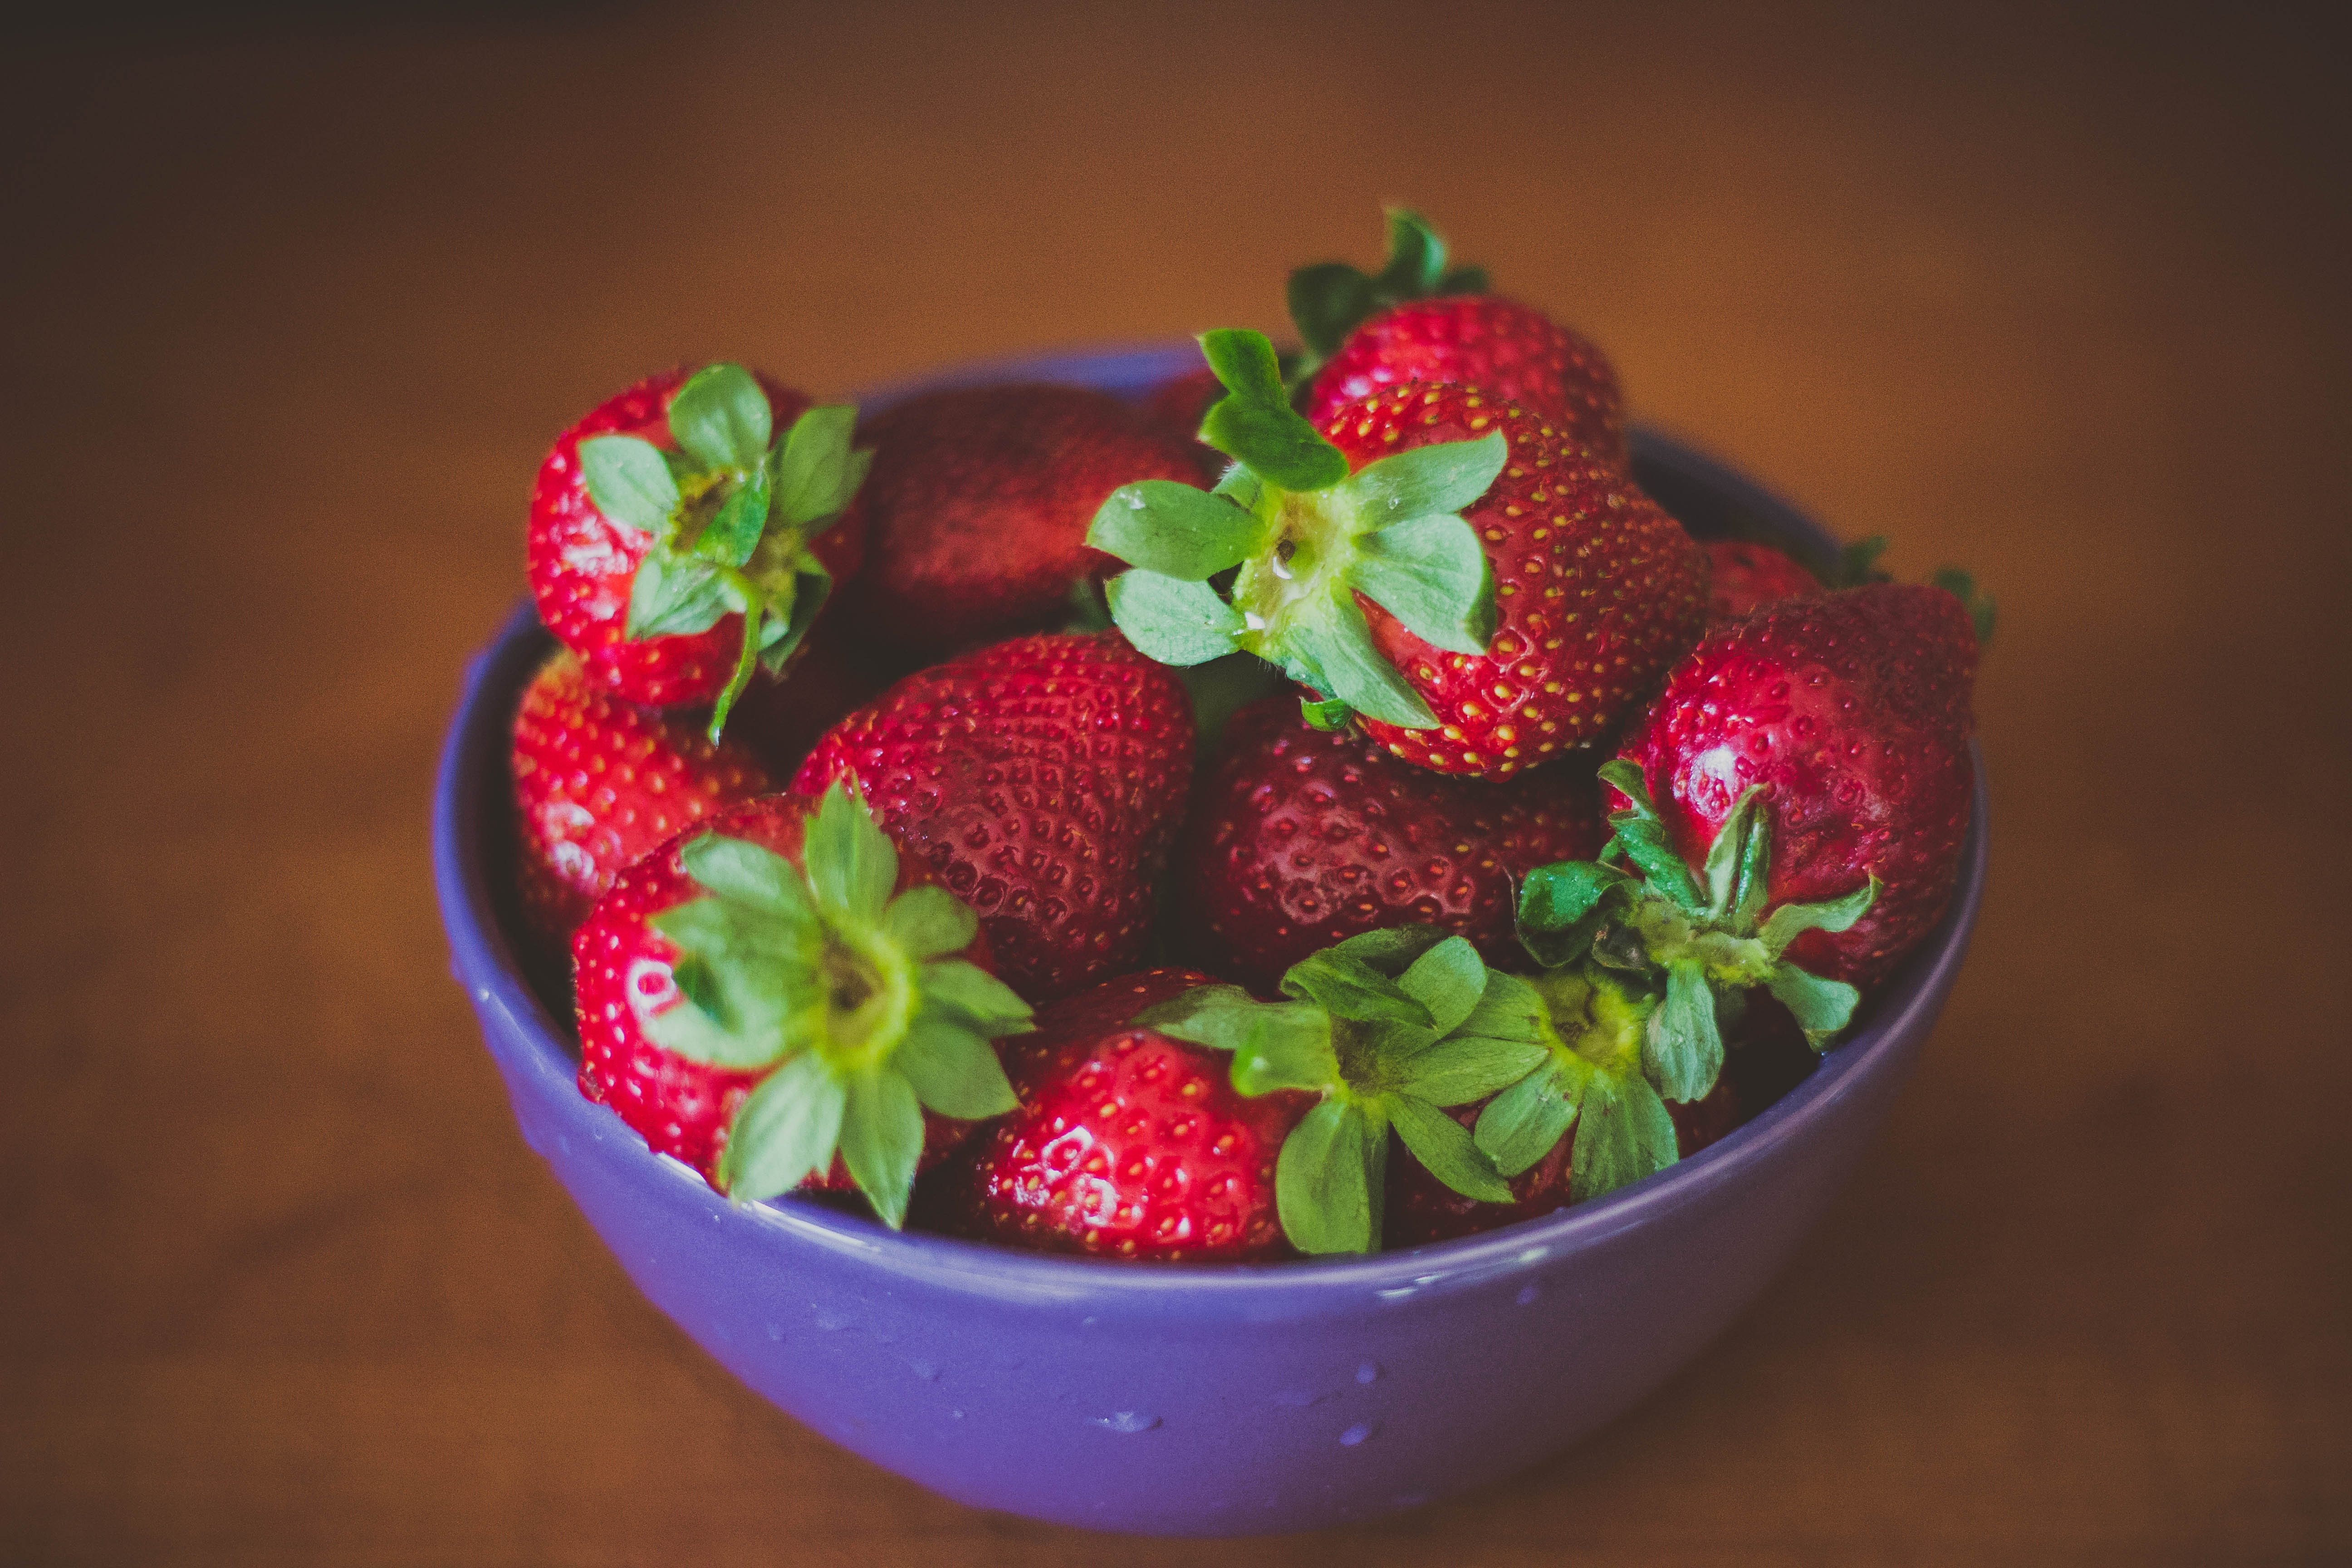 food, strawberry, berries, plate, ripe, appetizing